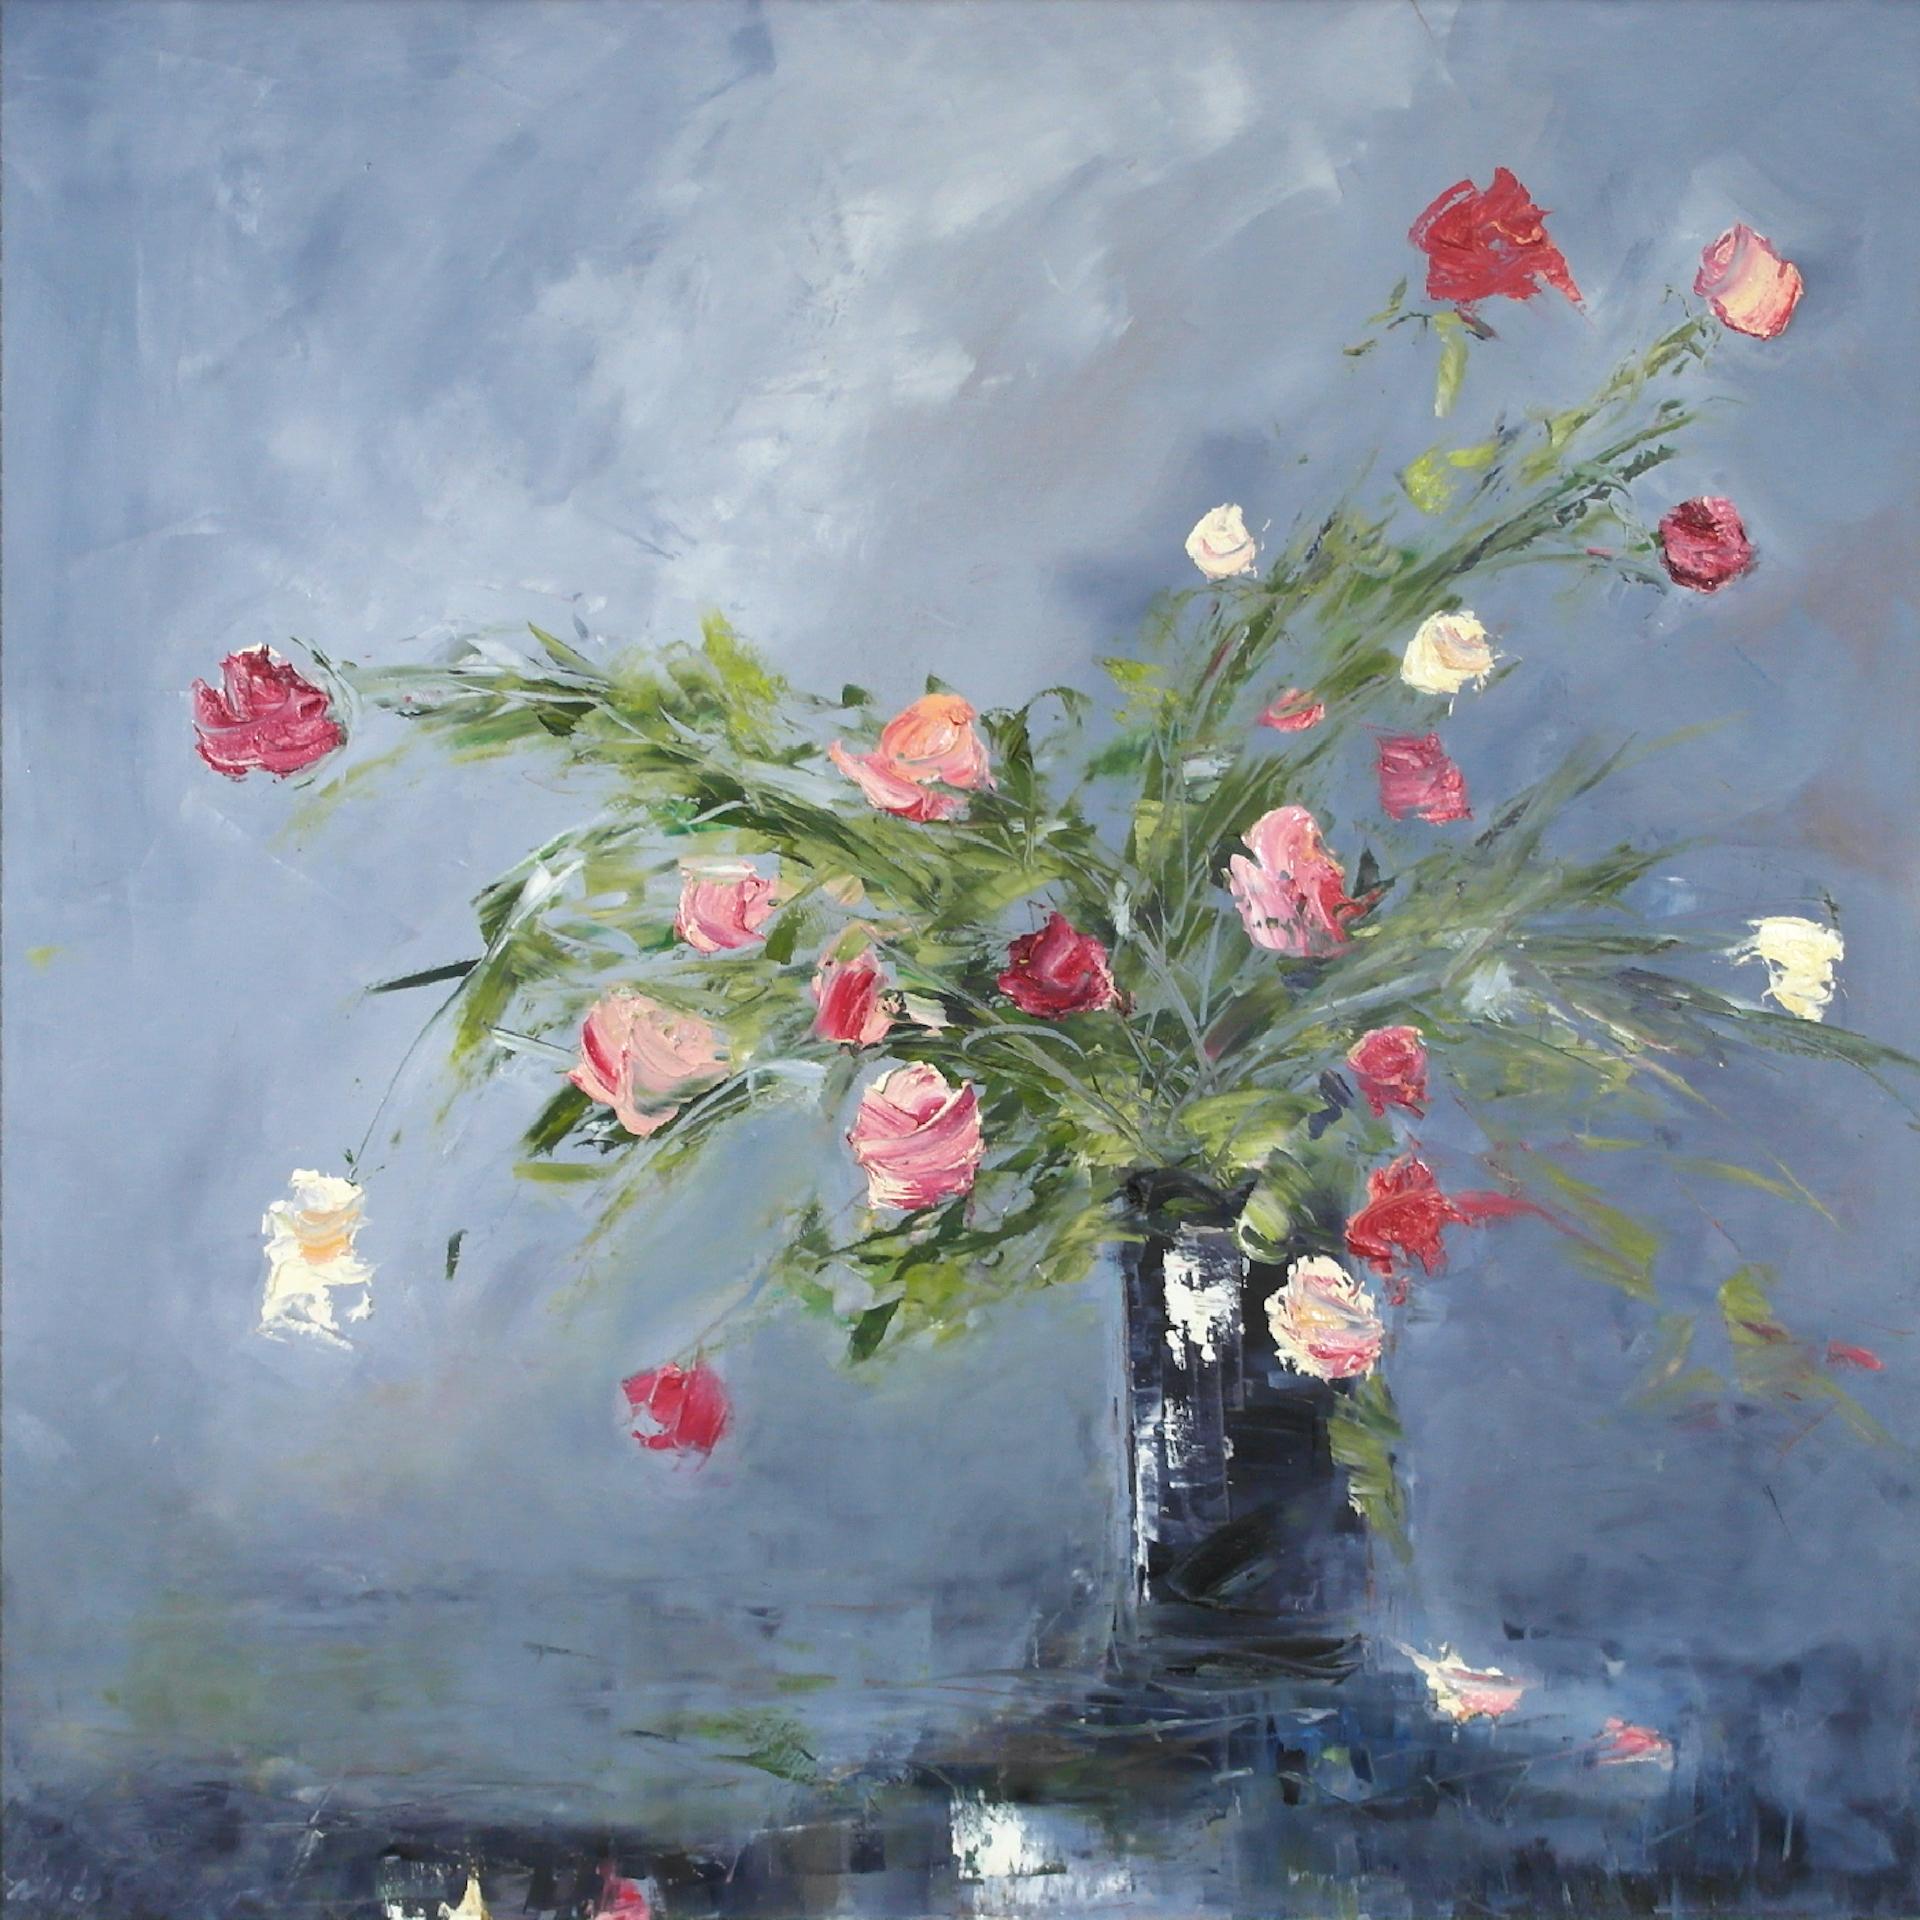 Libbi Gooch
Black Jar and Roses
Original Abstract Still Life Painting
Oil on Board
Canvas Size: 80 cm x 80 cm x .5 cm
Framed Size: 93 cm x 93 cm x 1.8 cm
Sold Framed
Free Shipping
Please note that in situ images are purely an indication of how a